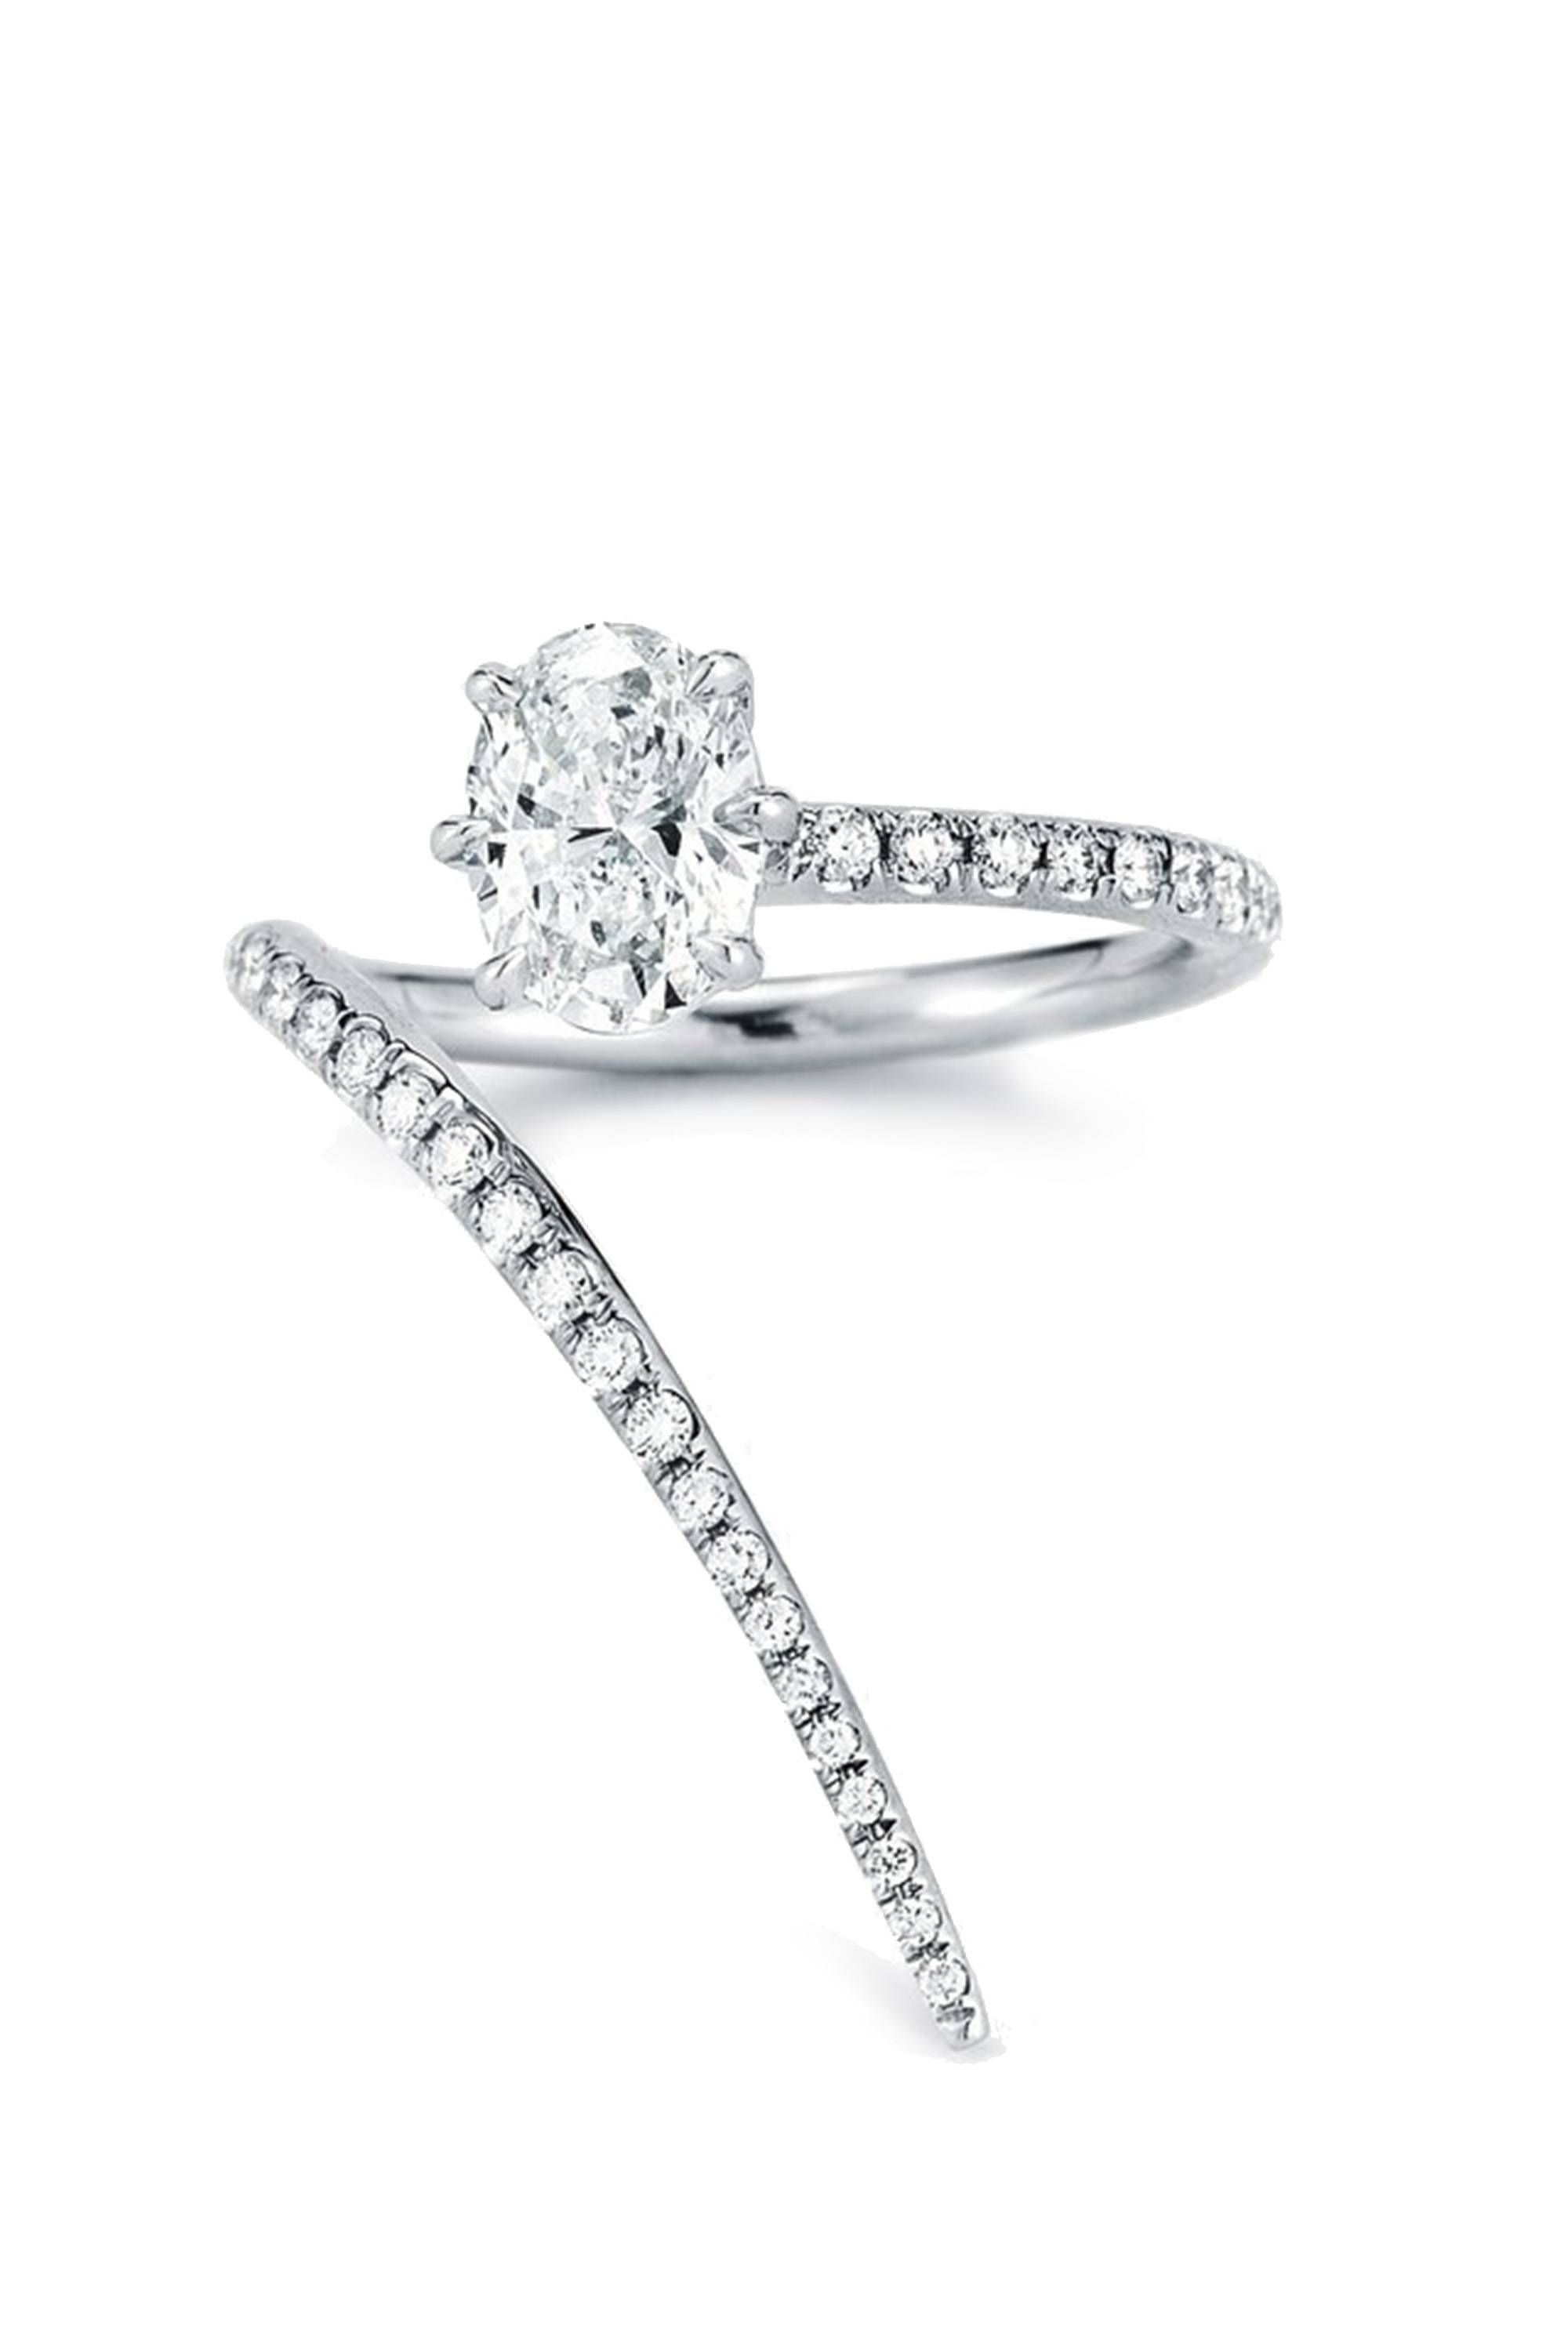 41 Unique Engagement Rings – Beautiful Non Diamond And Unusual With Artsy Wedding Rings (View 10 of 15)